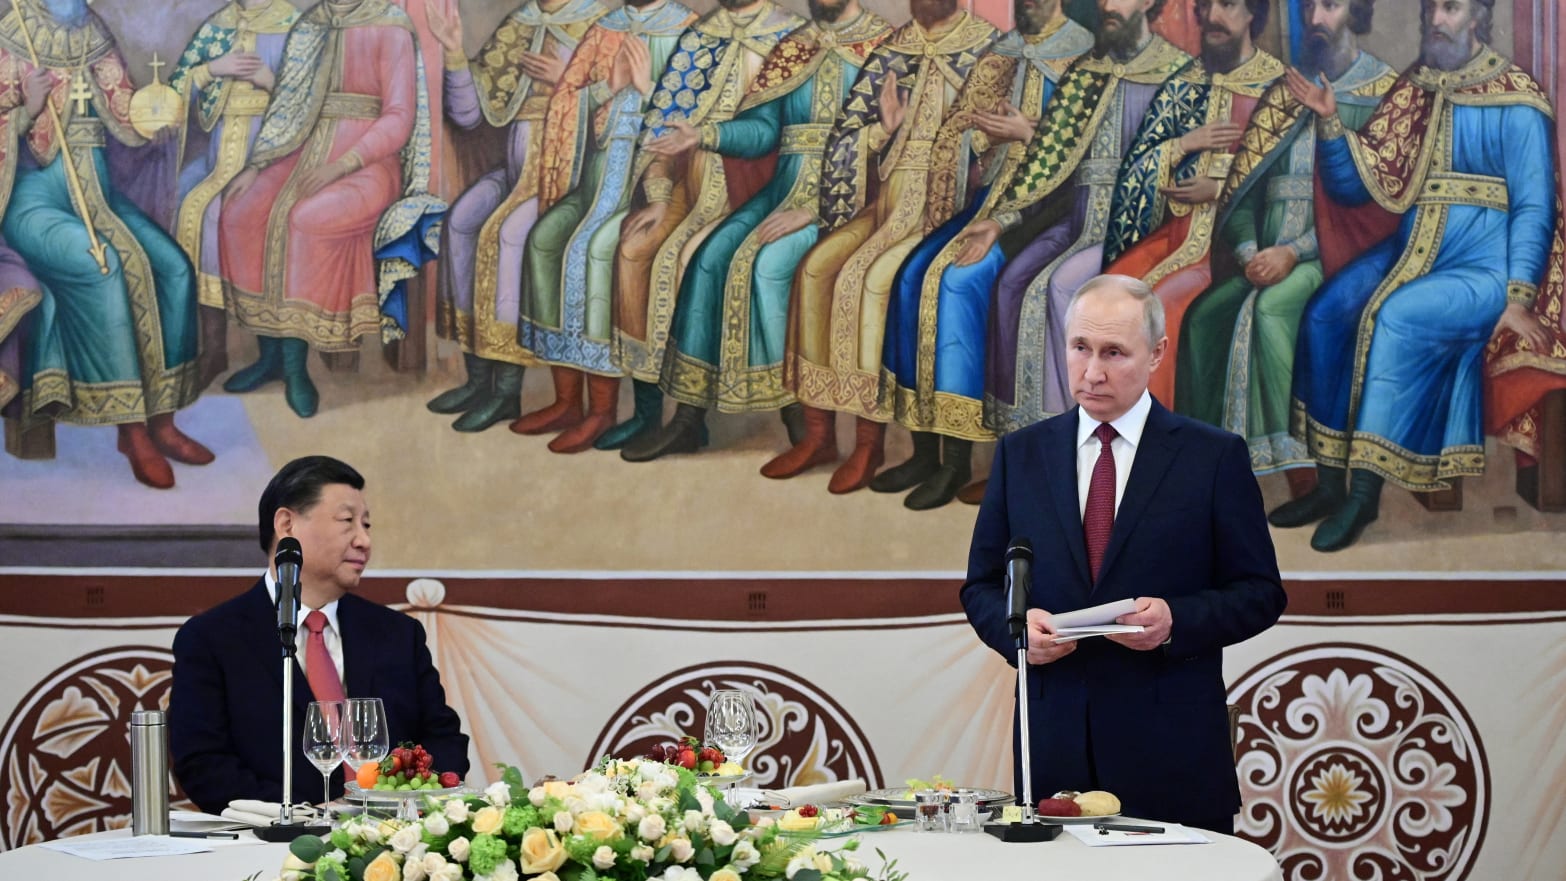 Chinese President Xi Jinping watches as Russian President Vladimir Putin speaks at a reception.